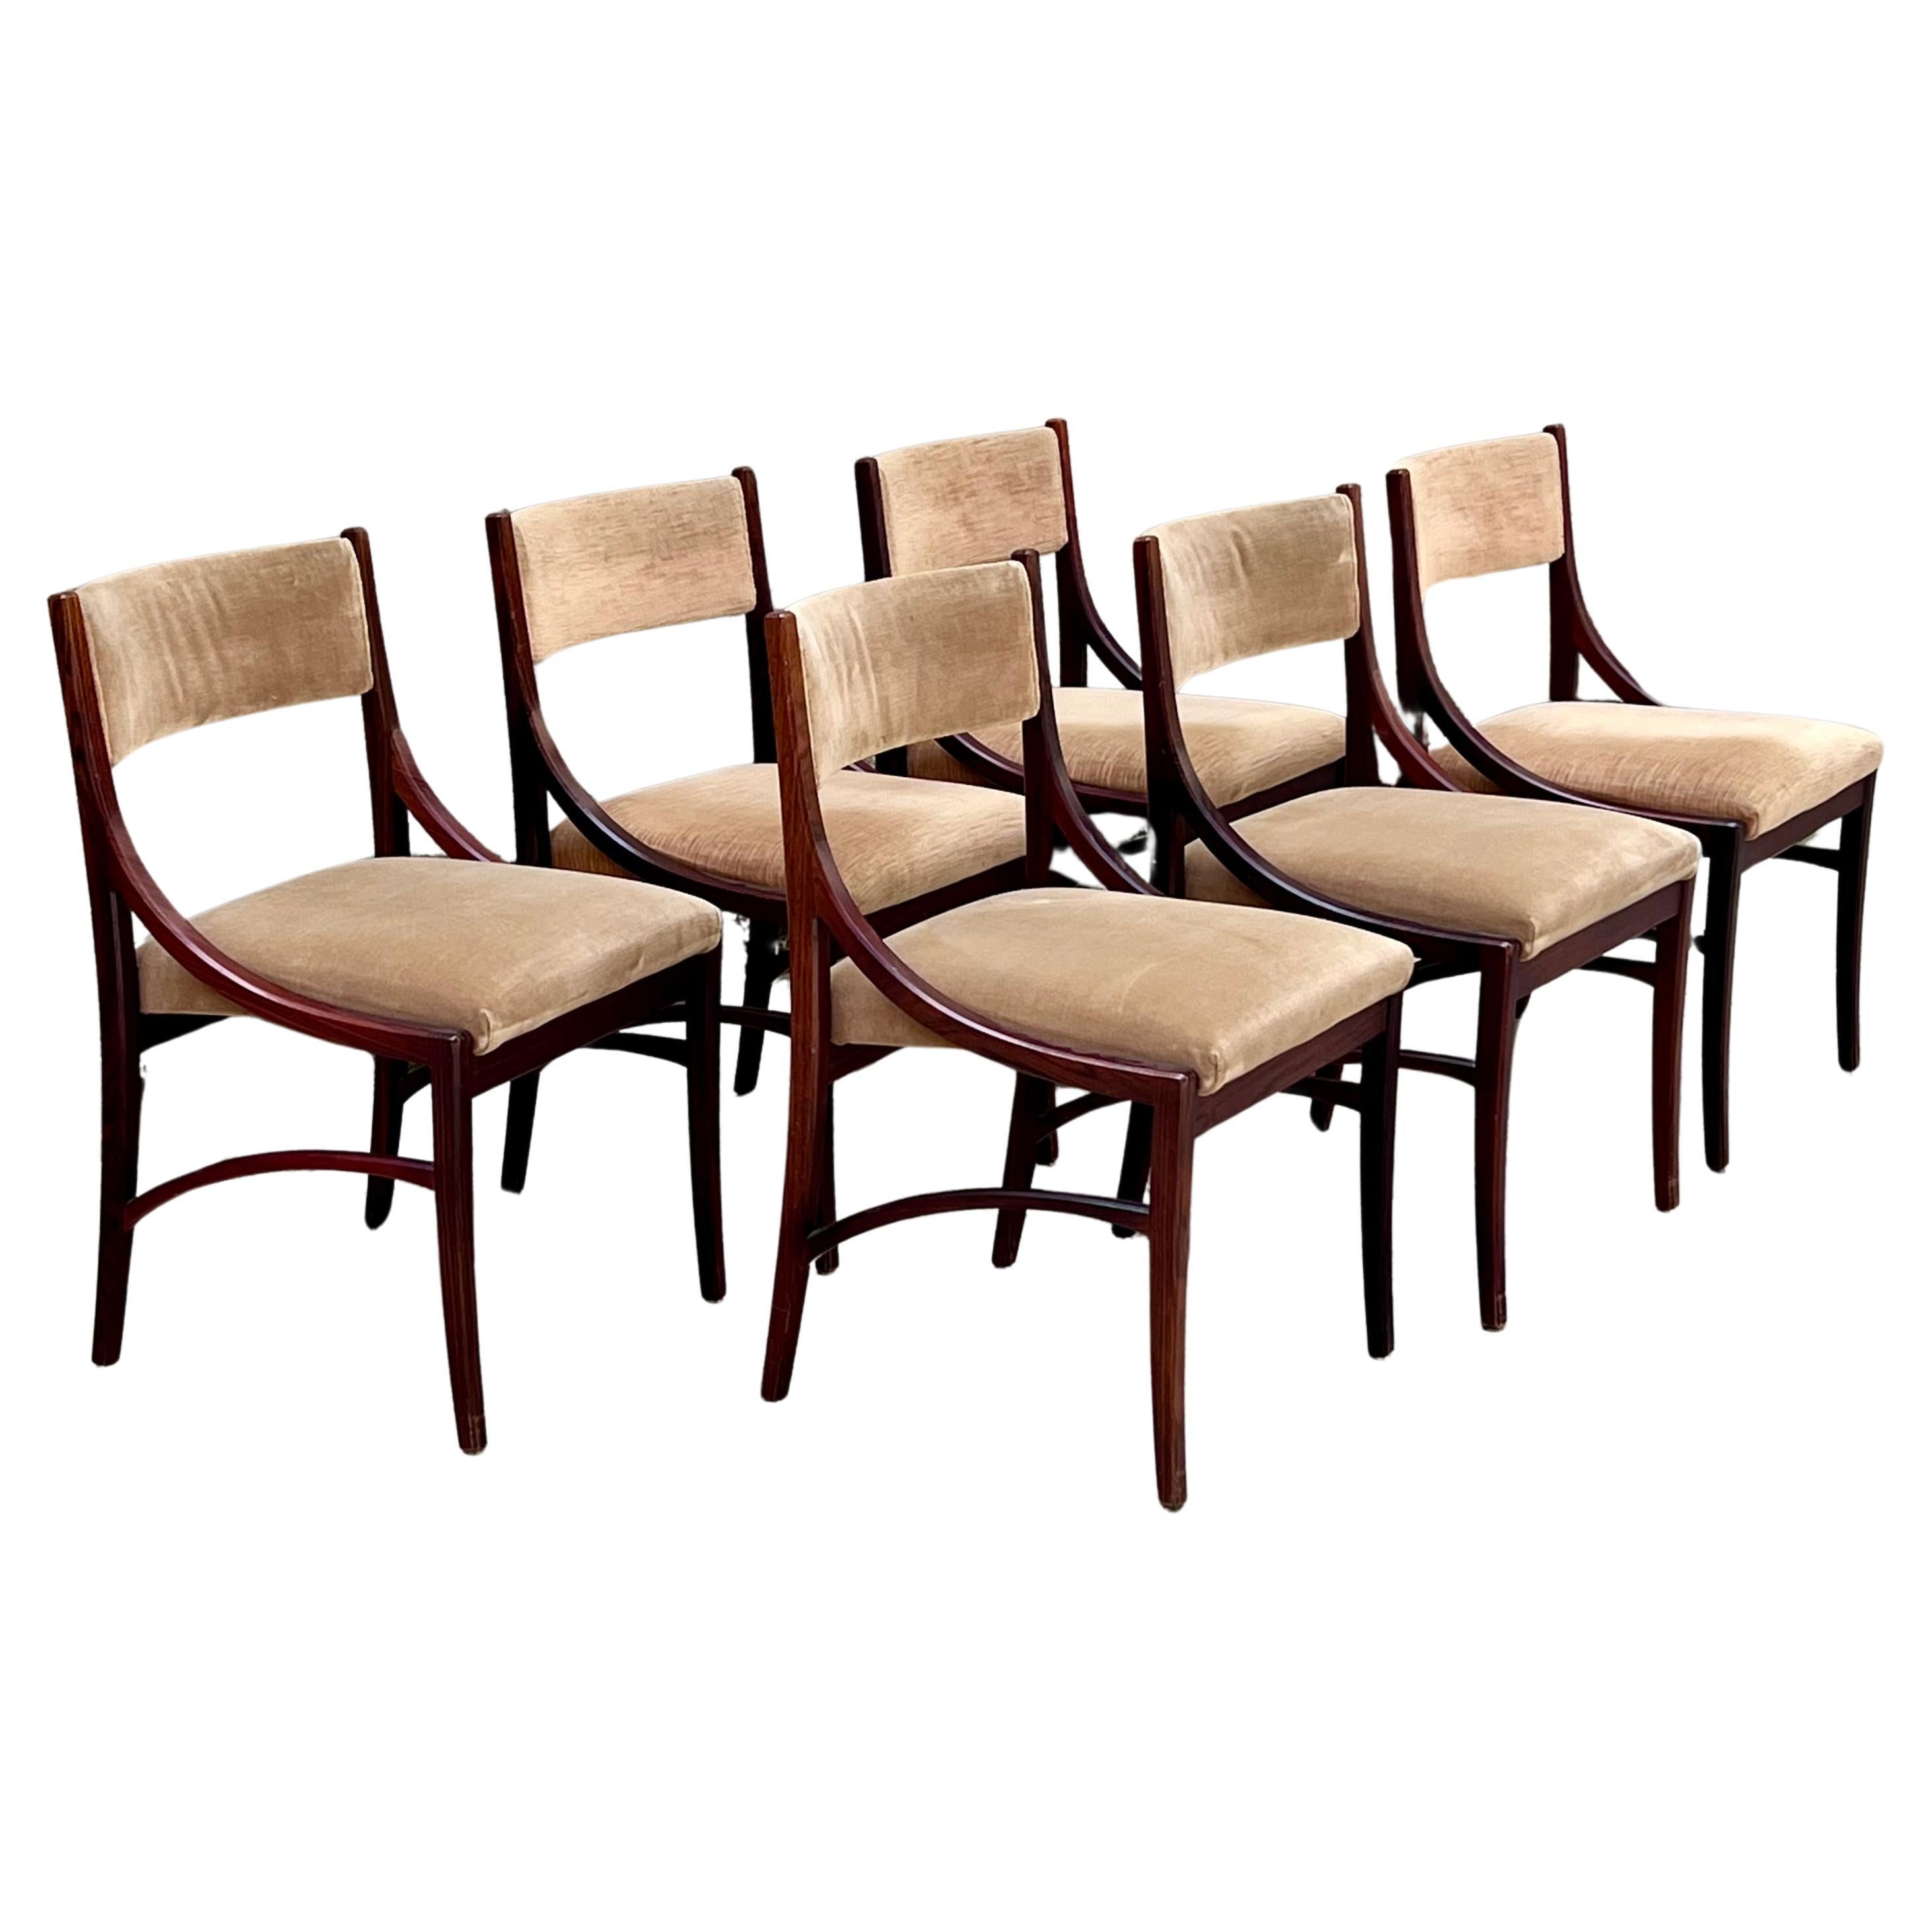 Set of Six Mahogany Chairs Mod.110 by Ico Parisi for Cassina - Italy - 1960s